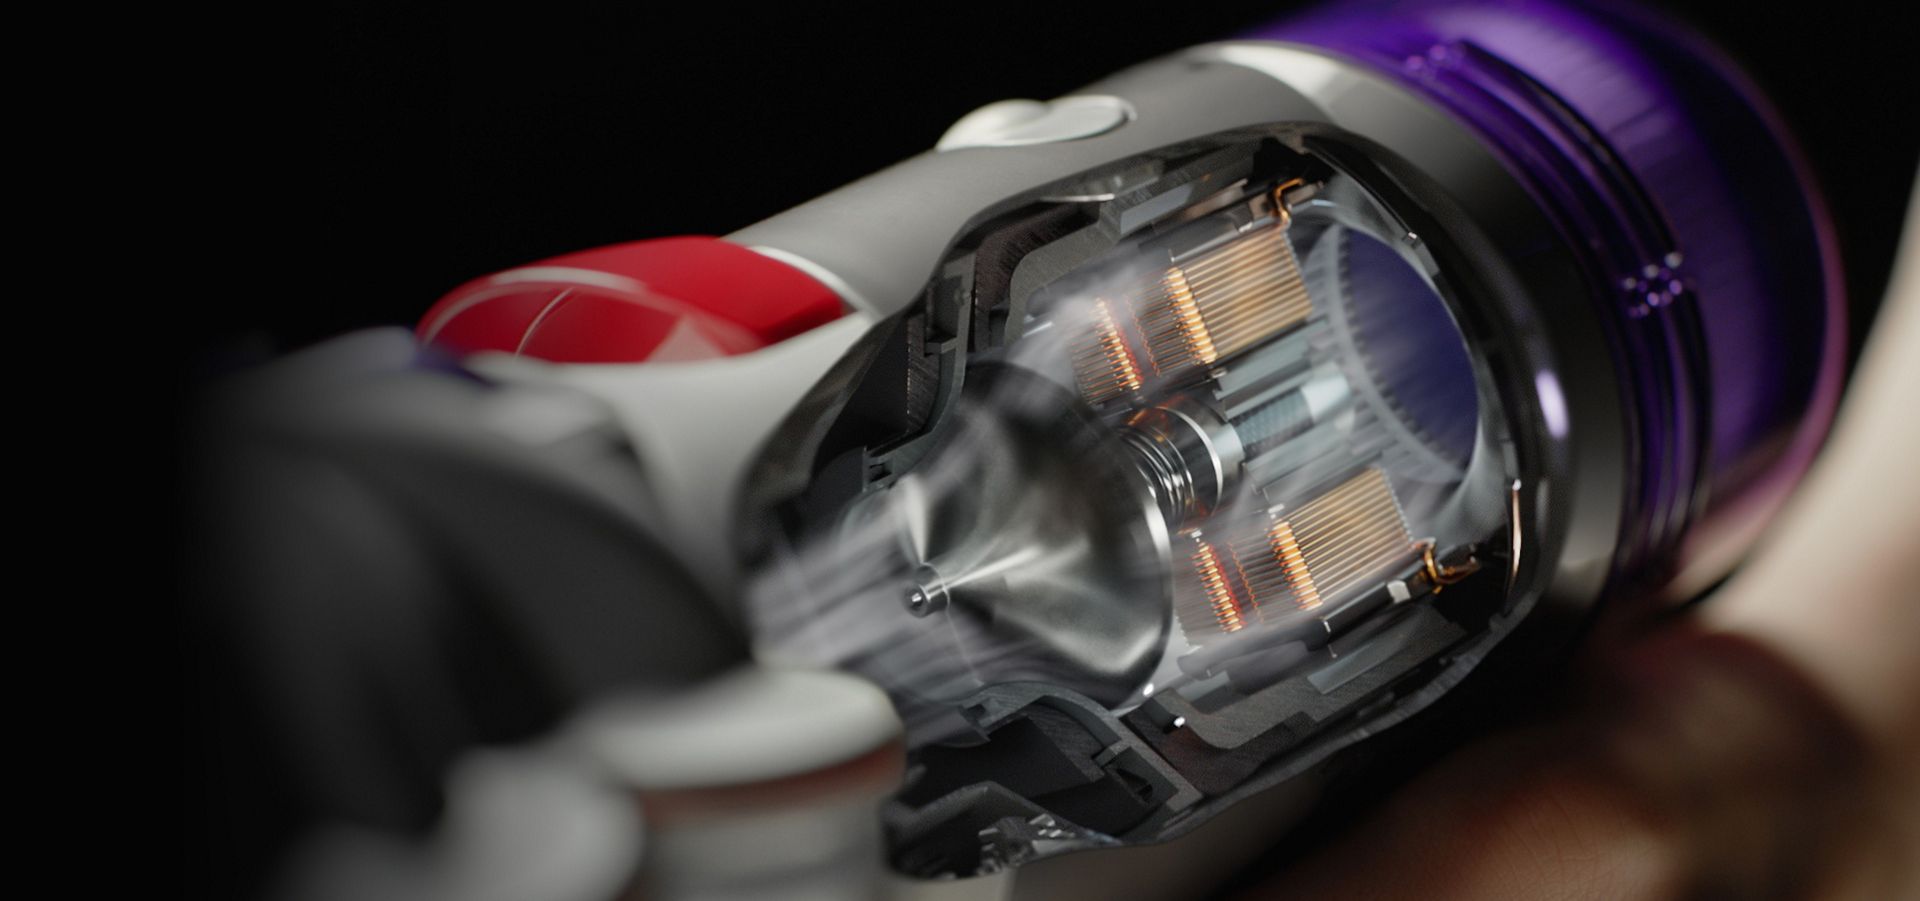 Our Thoughts On The Dyson V8 Absolute Cordless Vacuum - The Wild Decoelis